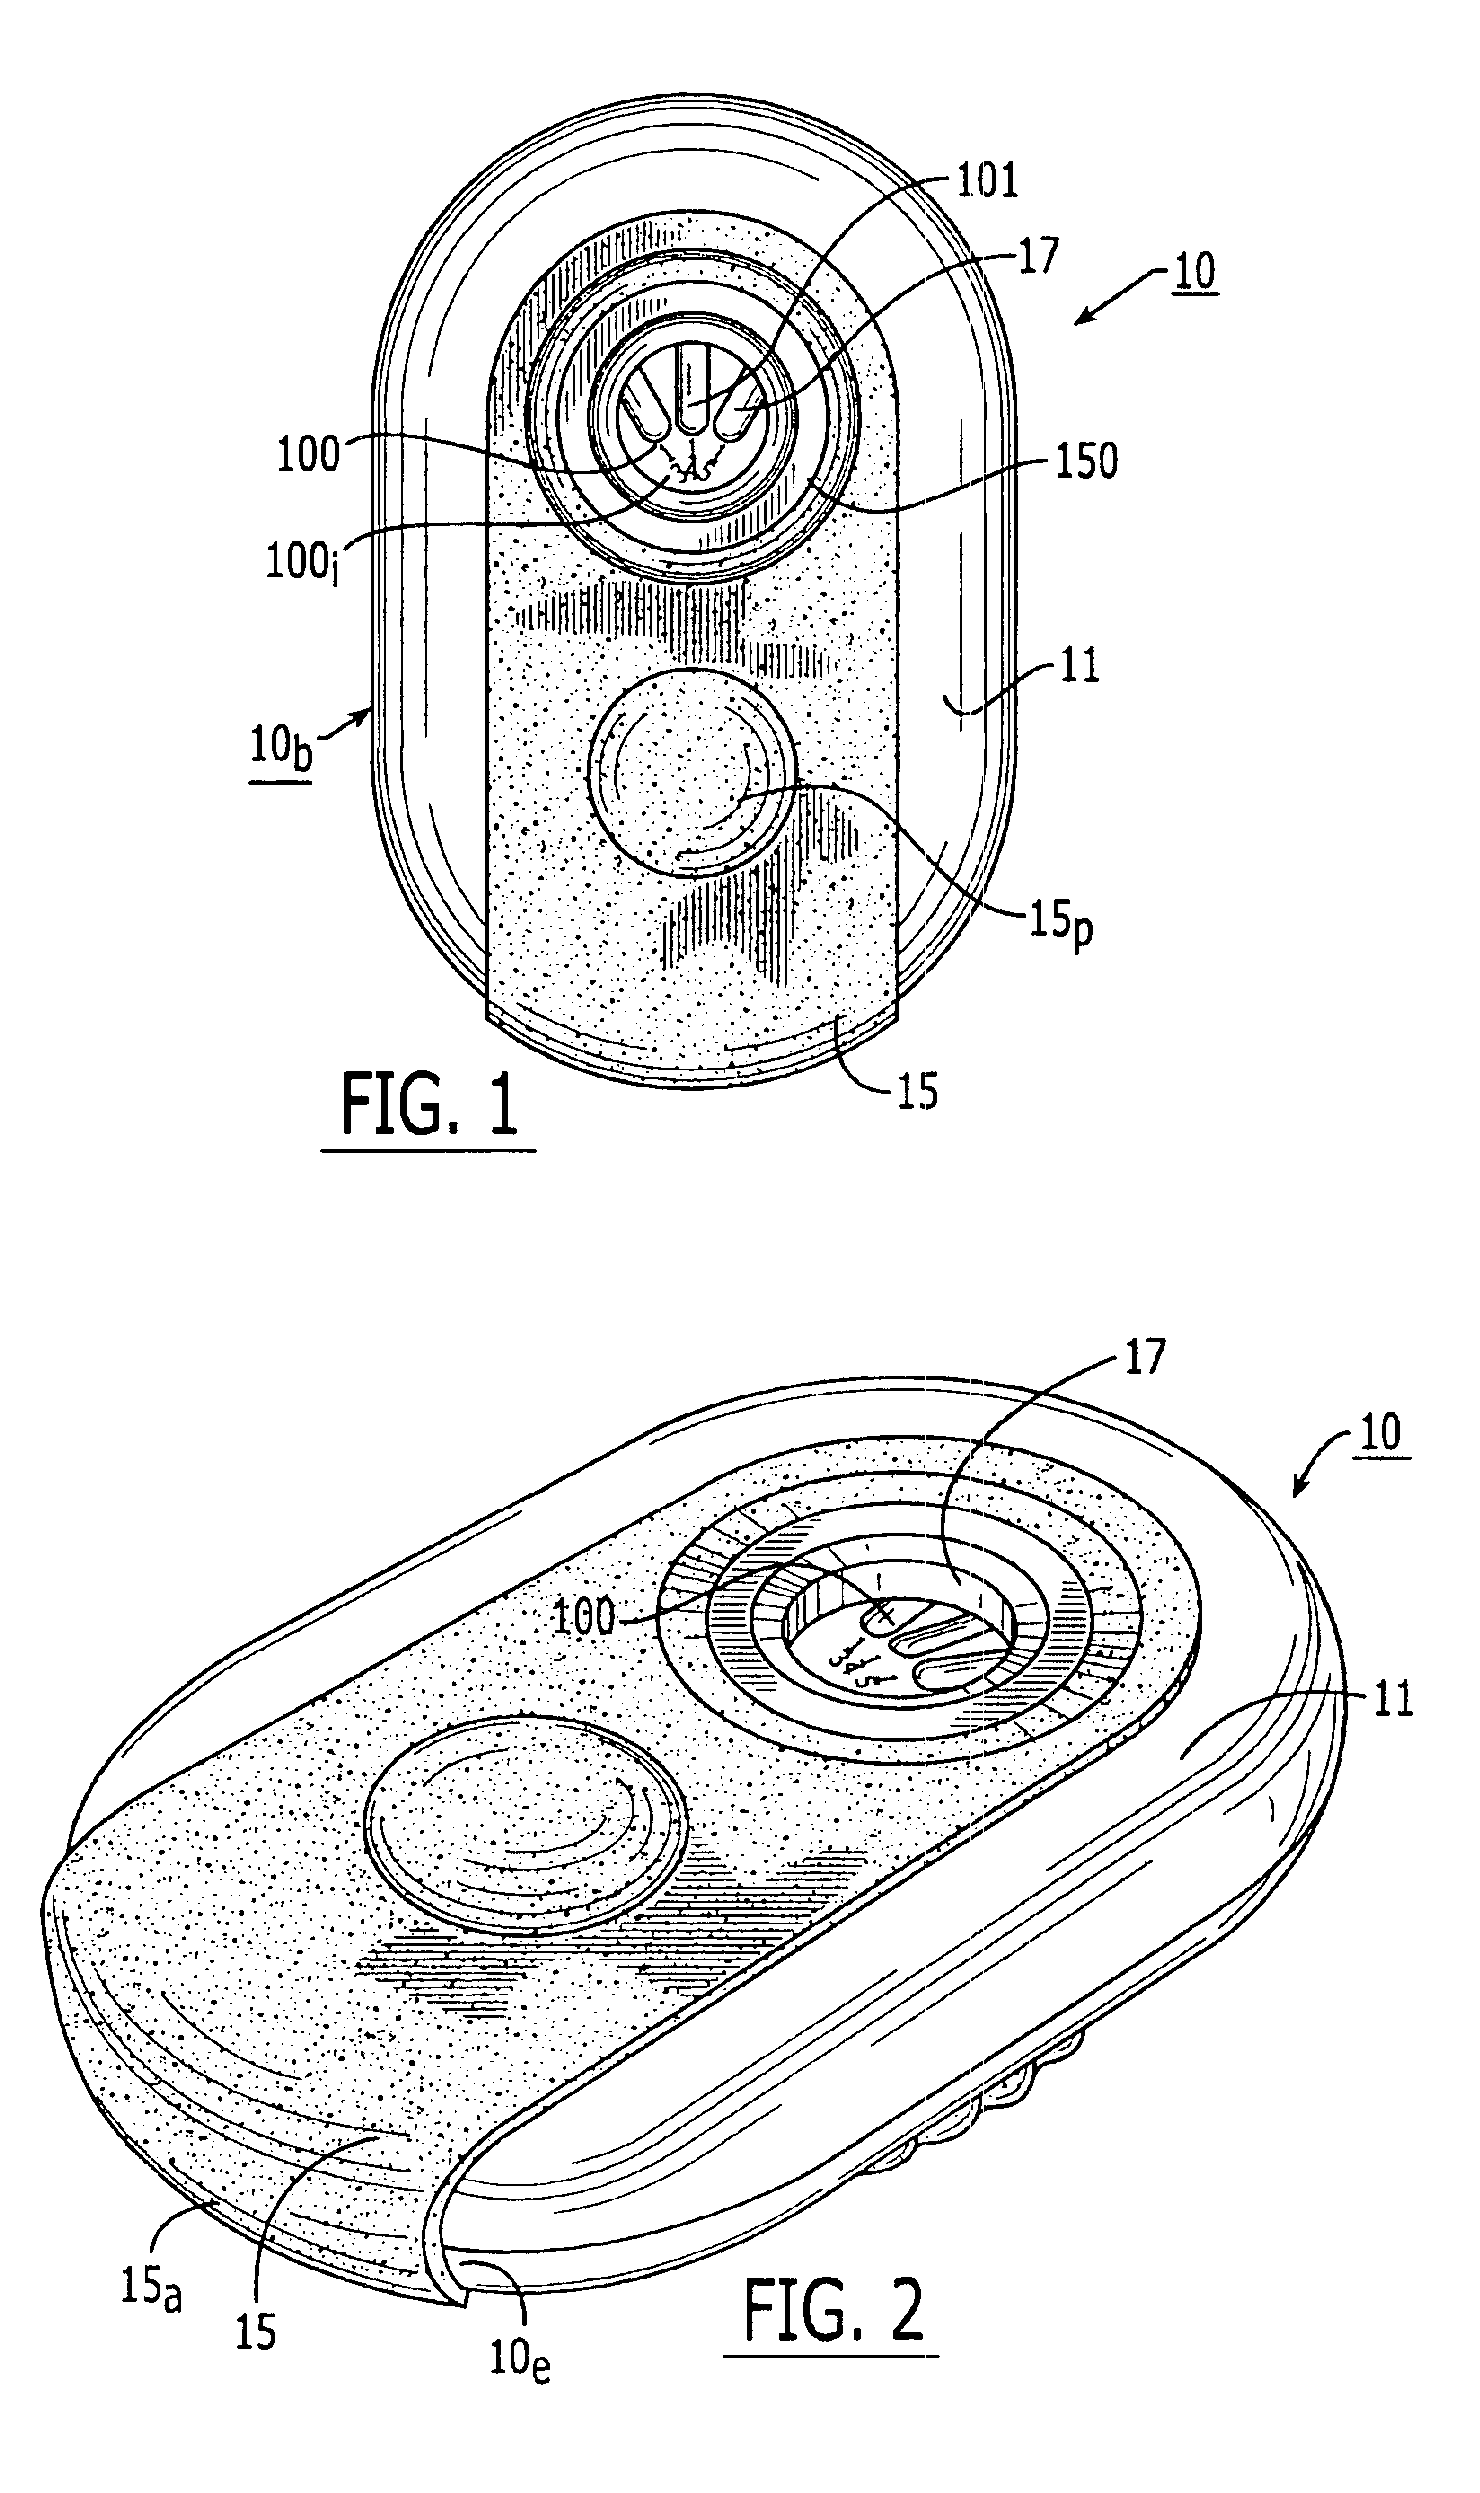 Dry powder inhalers, related blister devices, and associated methods of dispensing dry powder substances and fabricating blister packages